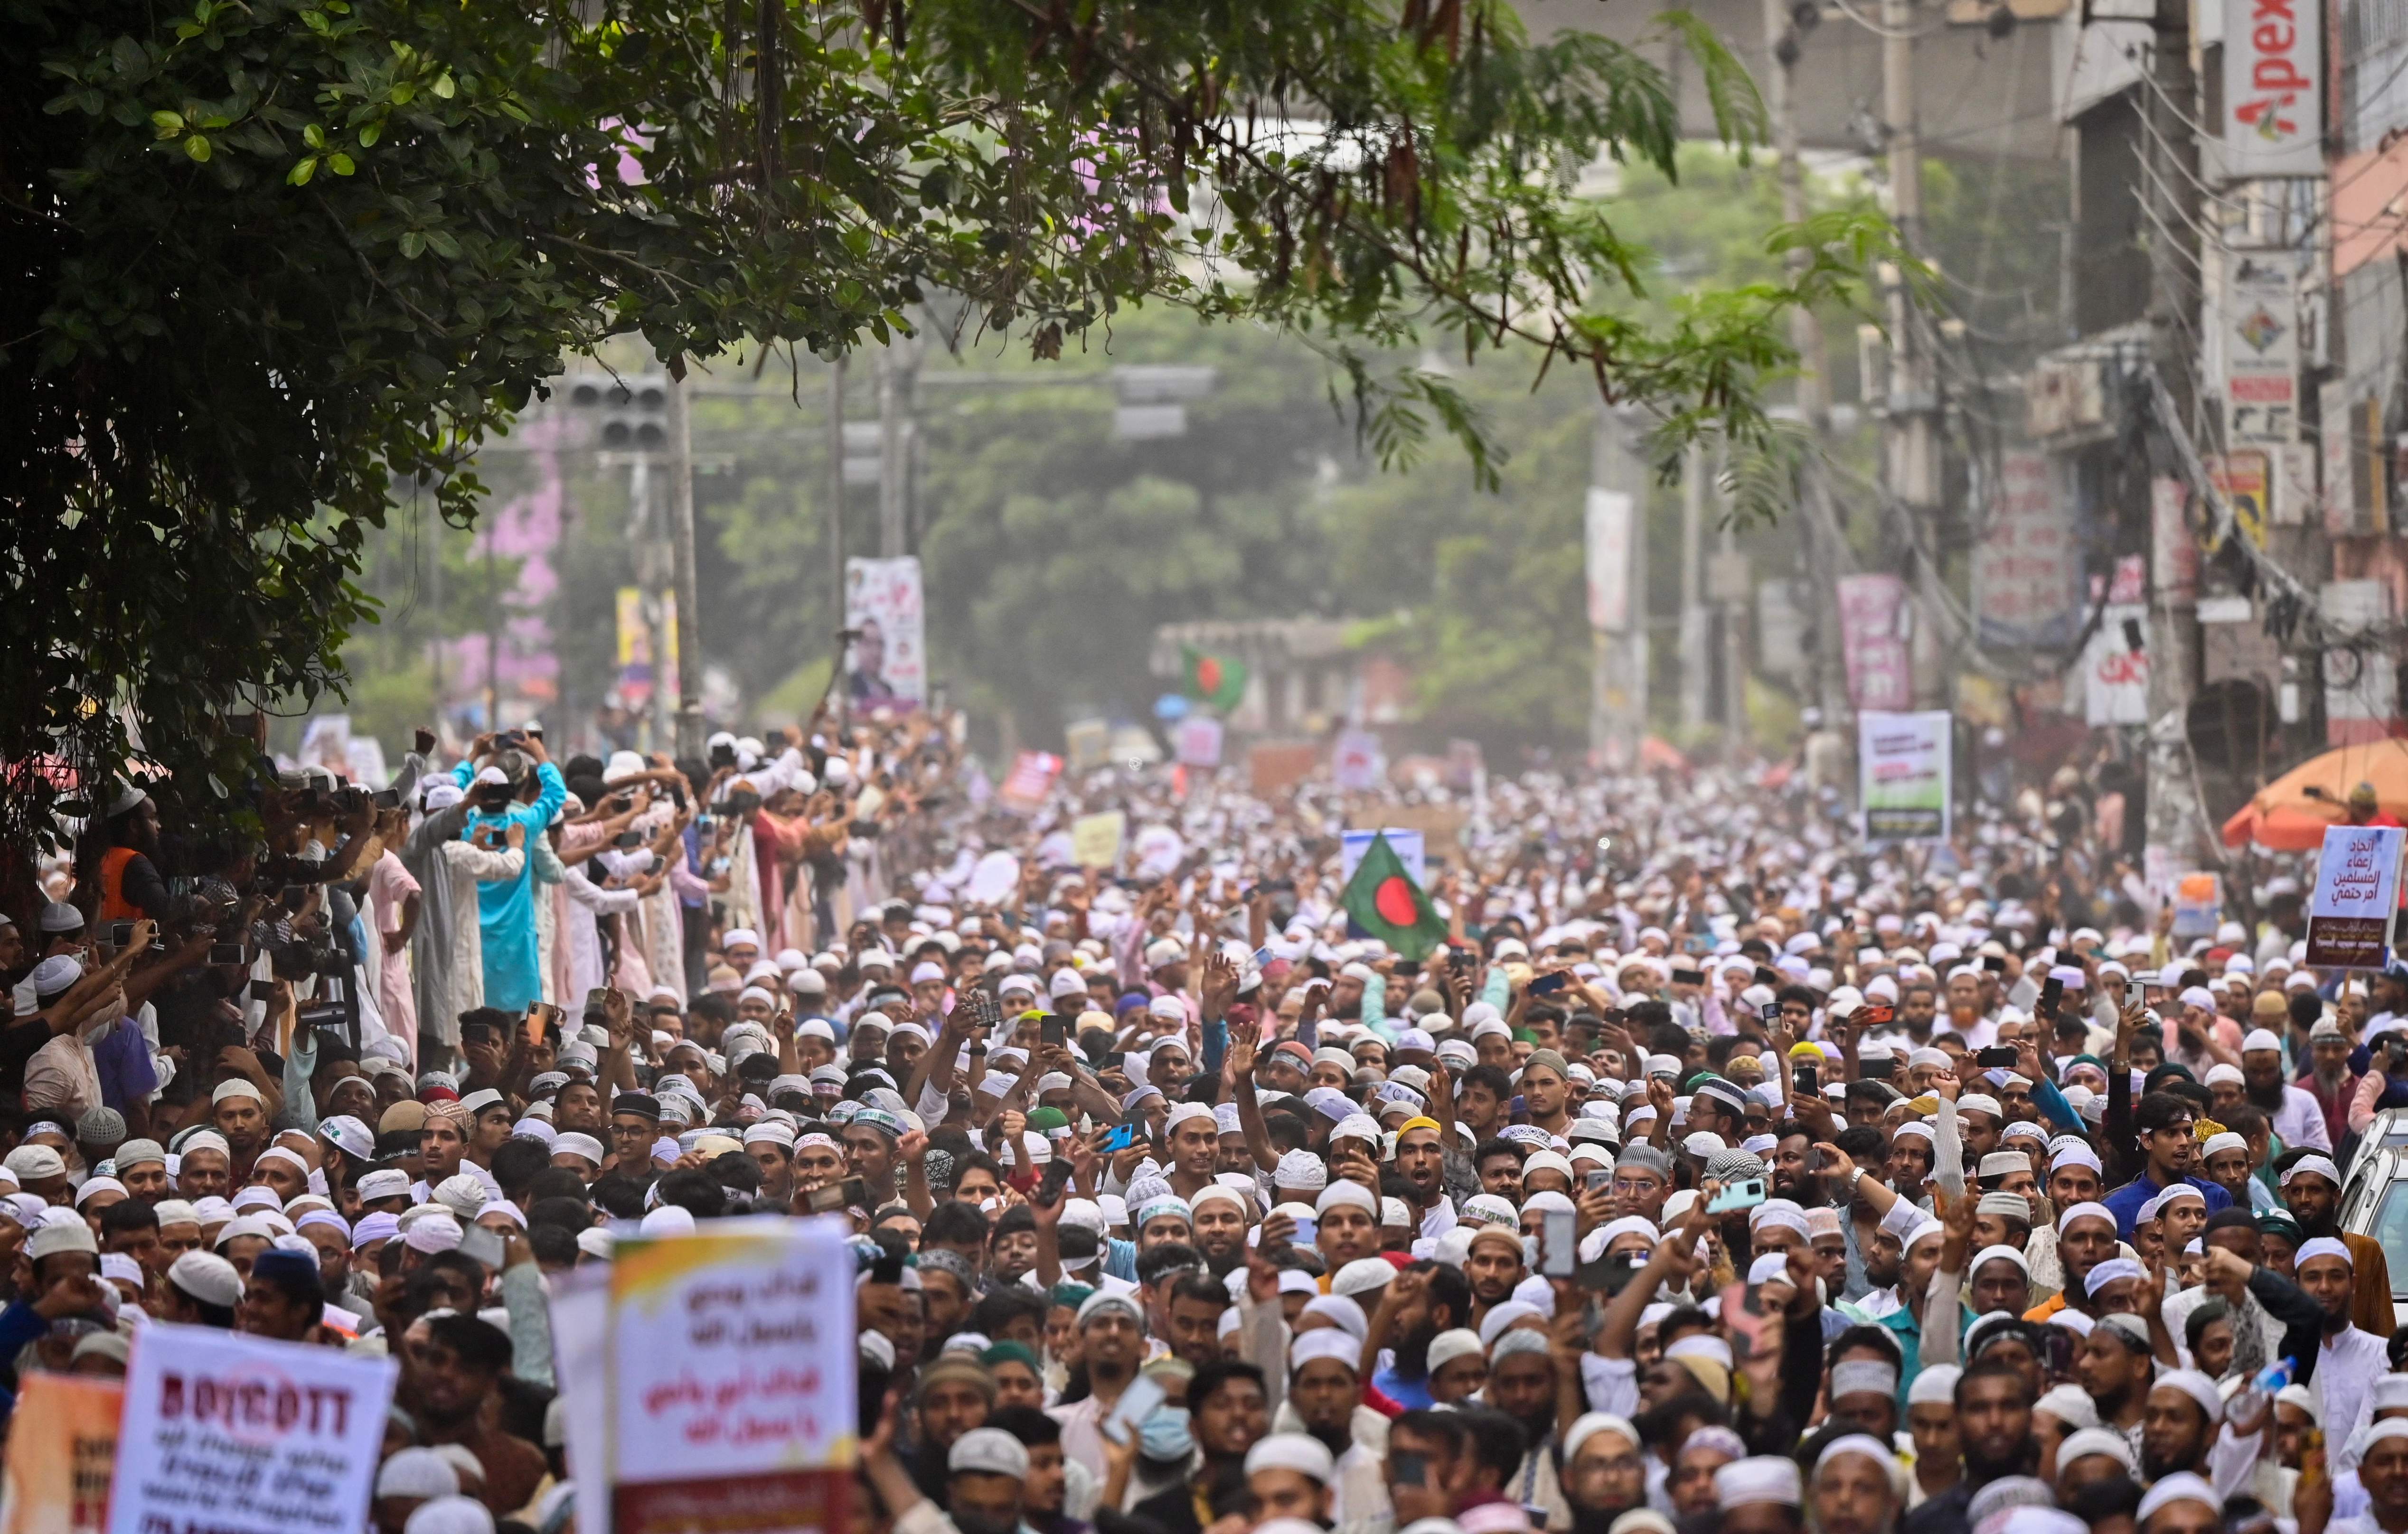 Bangladesh’s Islamist activists and supporters hold placards as they shout anti-India slogans